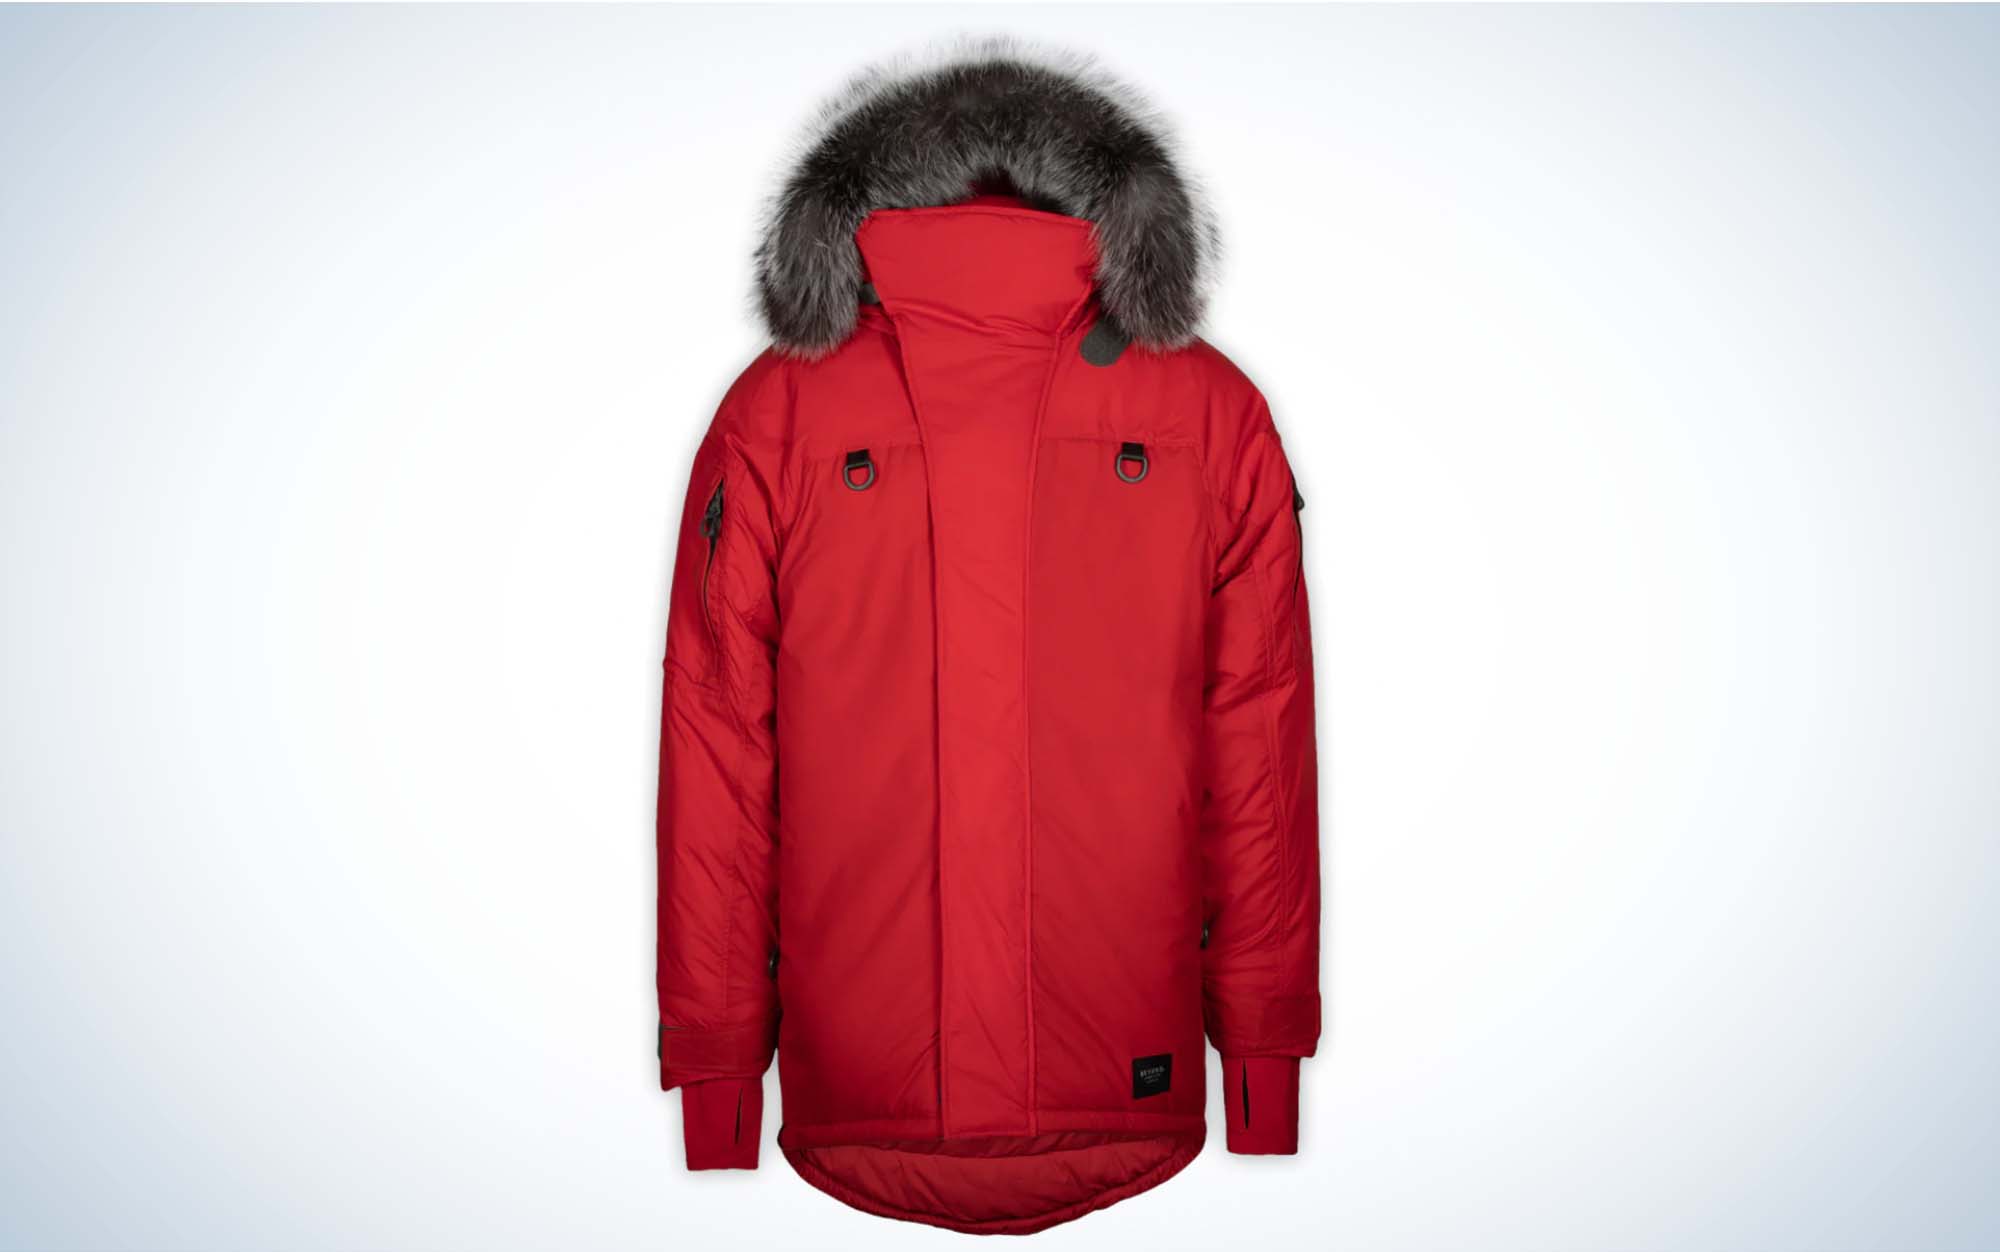 The best men's jacket for extreme cold.